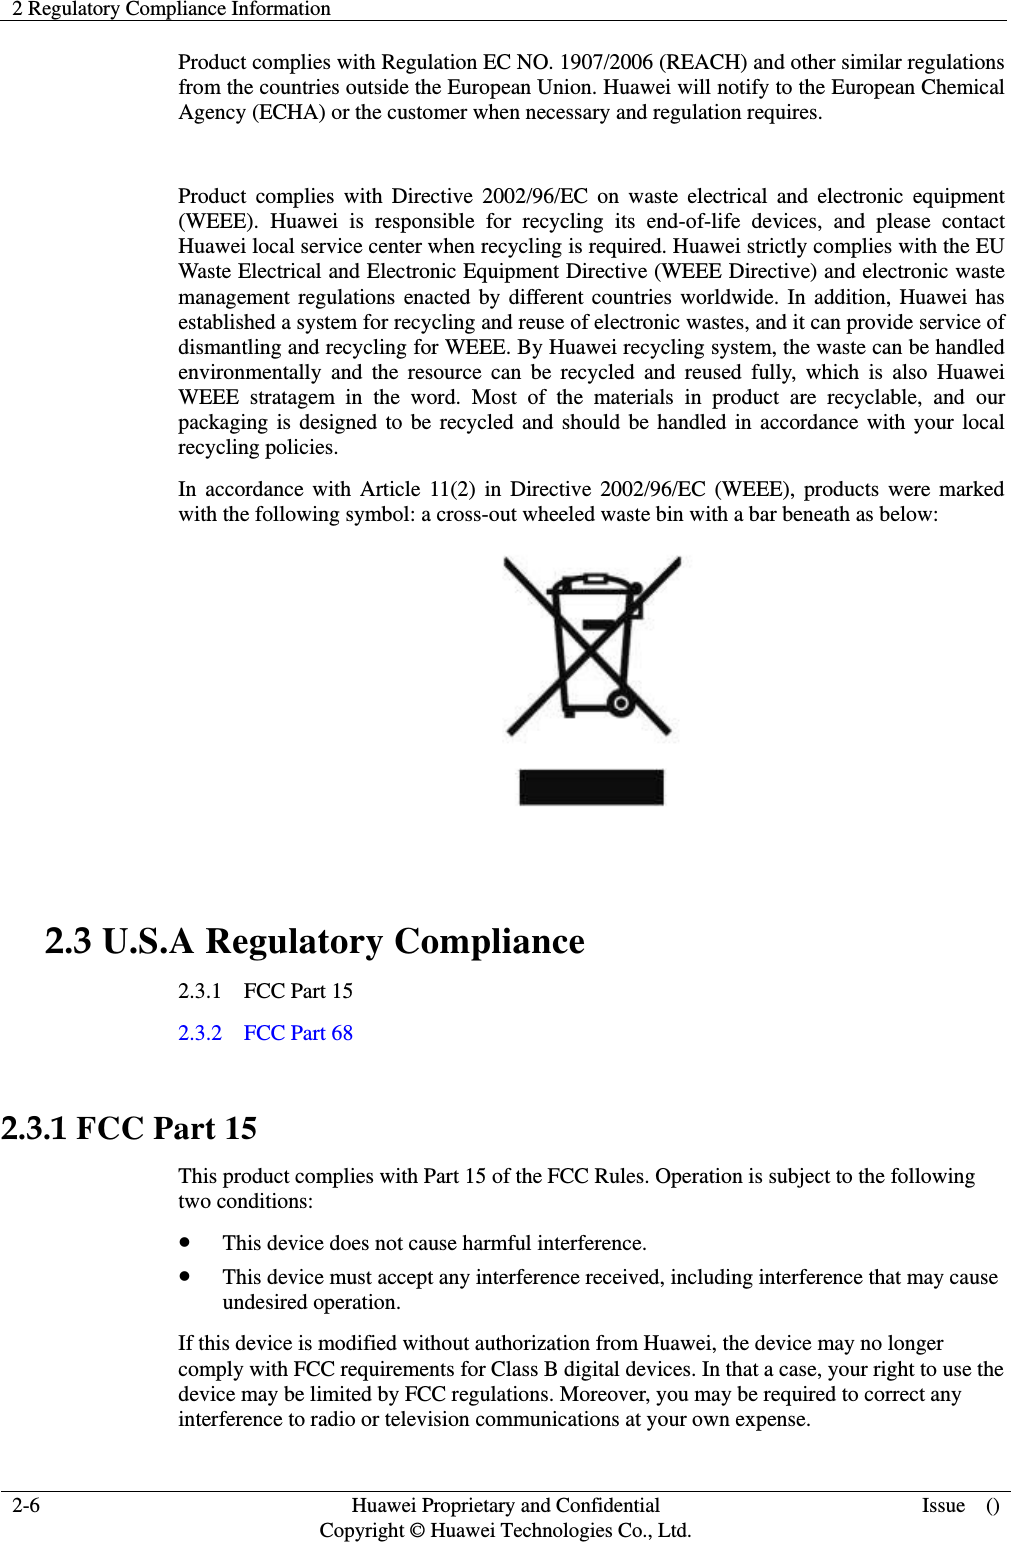 2 Regulatory Compliance Information     2-6  Huawei Proprietary and Confidential                                     Copyright © Huawei Technologies Co., Ltd.  Issue    ()  Product complies with Regulation EC NO. 1907/2006 (REACH) and other similar regulations from the countries outside the European Union. Huawei will notify to the European Chemical Agency (ECHA) or the customer when necessary and regulation requires.  Product  complies  with  Directive  2002/96/EC  on  waste  electrical  and electronic  equipment (WEEE).  Huawei  is  responsible  for  recycling  its  end-of-life  devices,  and  please  contact Huawei local service center when recycling is required. Huawei strictly complies with the EU Waste Electrical and Electronic Equipment Directive (WEEE Directive) and electronic waste management regulations enacted by different countries worldwide. In addition, Huawei has established a system for recycling and reuse of electronic wastes, and it can provide service of dismantling and recycling for WEEE. By Huawei recycling system, the waste can be handled environmentally  and  the  resource  can  be  recycled  and  reused  fully,  which  is  also  Huawei WEEE  stratagem  in  the  word.  Most  of  the  materials  in  product  are  recyclable,  and  our packaging is designed to be recycled and should be handled in accordance with your local recycling policies.   In accordance  with Article 11(2) in Directive 2002/96/EC  (WEEE), products were  marked with the following symbol: a cross-out wheeled waste bin with a bar beneath as below:   2.3 U.S.A Regulatory Compliance 2.3.1    FCC Part 15 2.3.2    FCC Part 68  2.3.1 FCC Part 15 This product complies with Part 15 of the FCC Rules. Operation is subject to the following two conditions:  This device does not cause harmful interference.  This device must accept any interference received, including interference that may cause undesired operation. If this device is modified without authorization from Huawei, the device may no longer comply with FCC requirements for Class B digital devices. In that a case, your right to use the device may be limited by FCC regulations. Moreover, you may be required to correct any interference to radio or television communications at your own expense. 